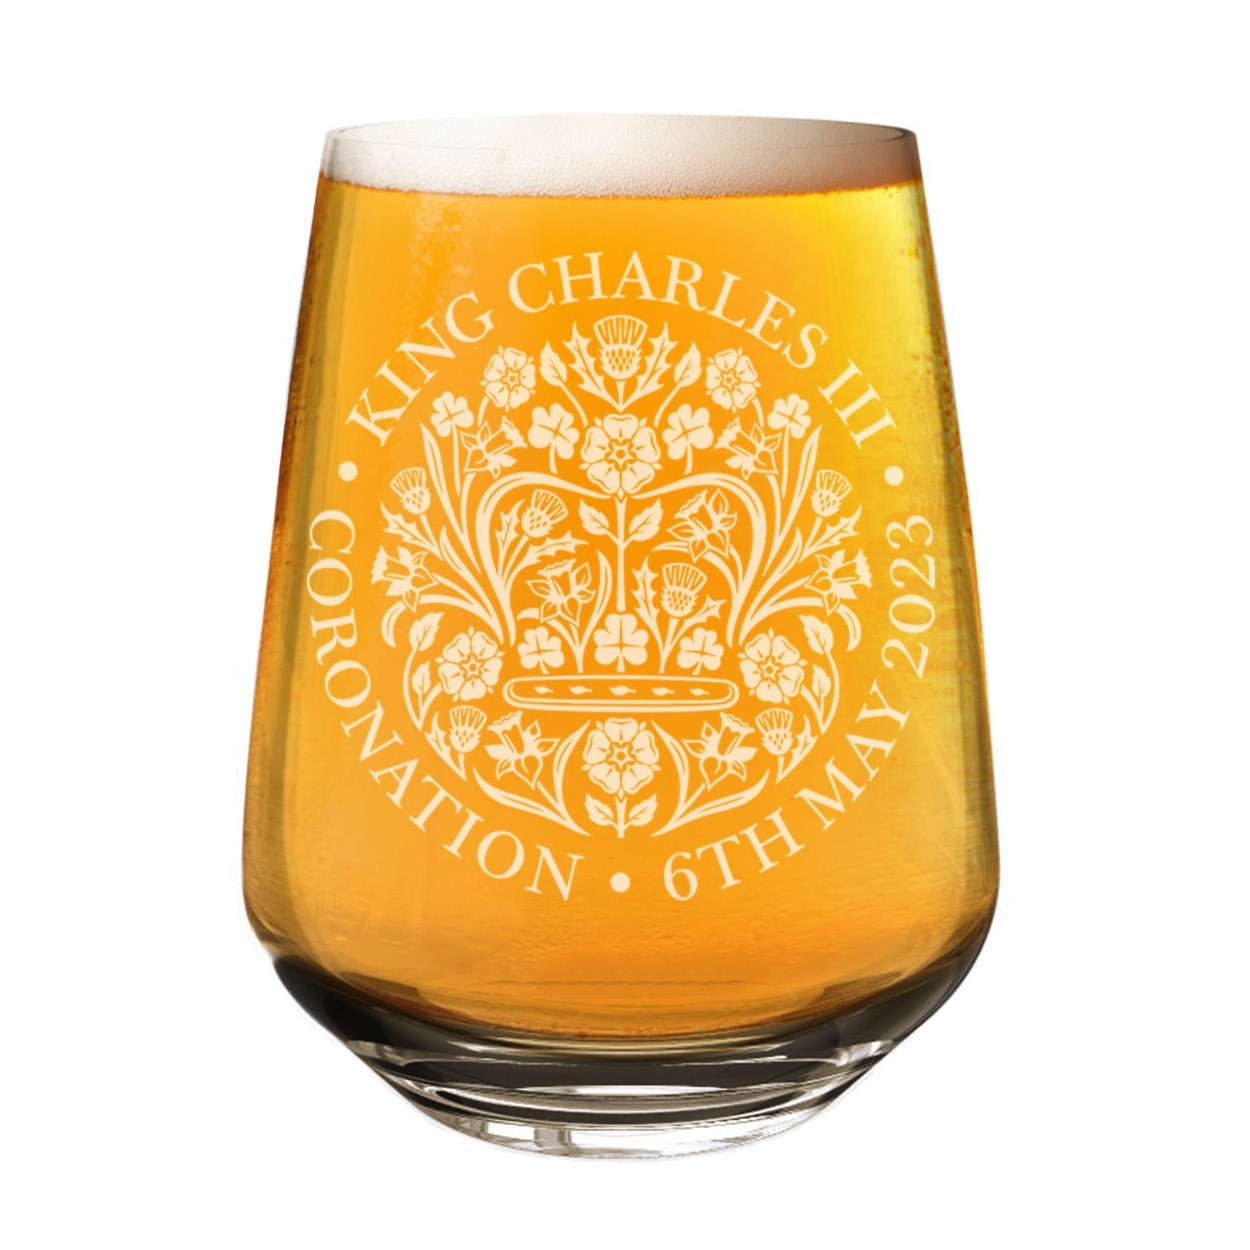 Coronation Emblem King Charles III Craft Beer Gin Wine Tumbler Glass Cider 2/3 Pint Commemorative Souvenir Gift His Majesty 6th May 2023